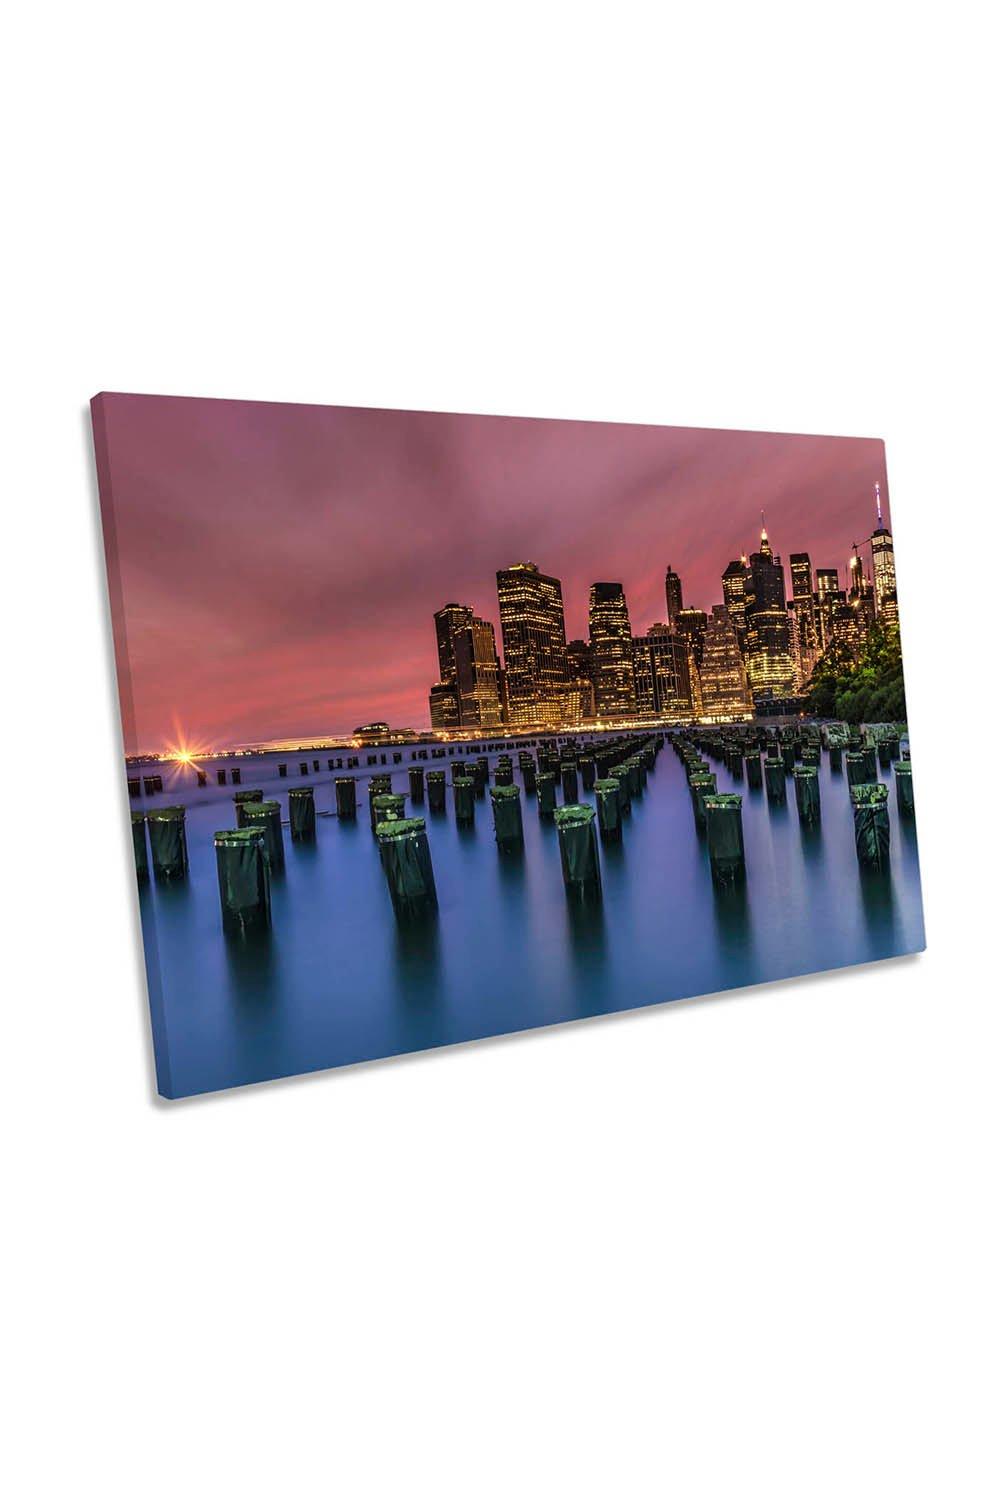 New York City NYC Skyline Canvas Wall Art Picture Print